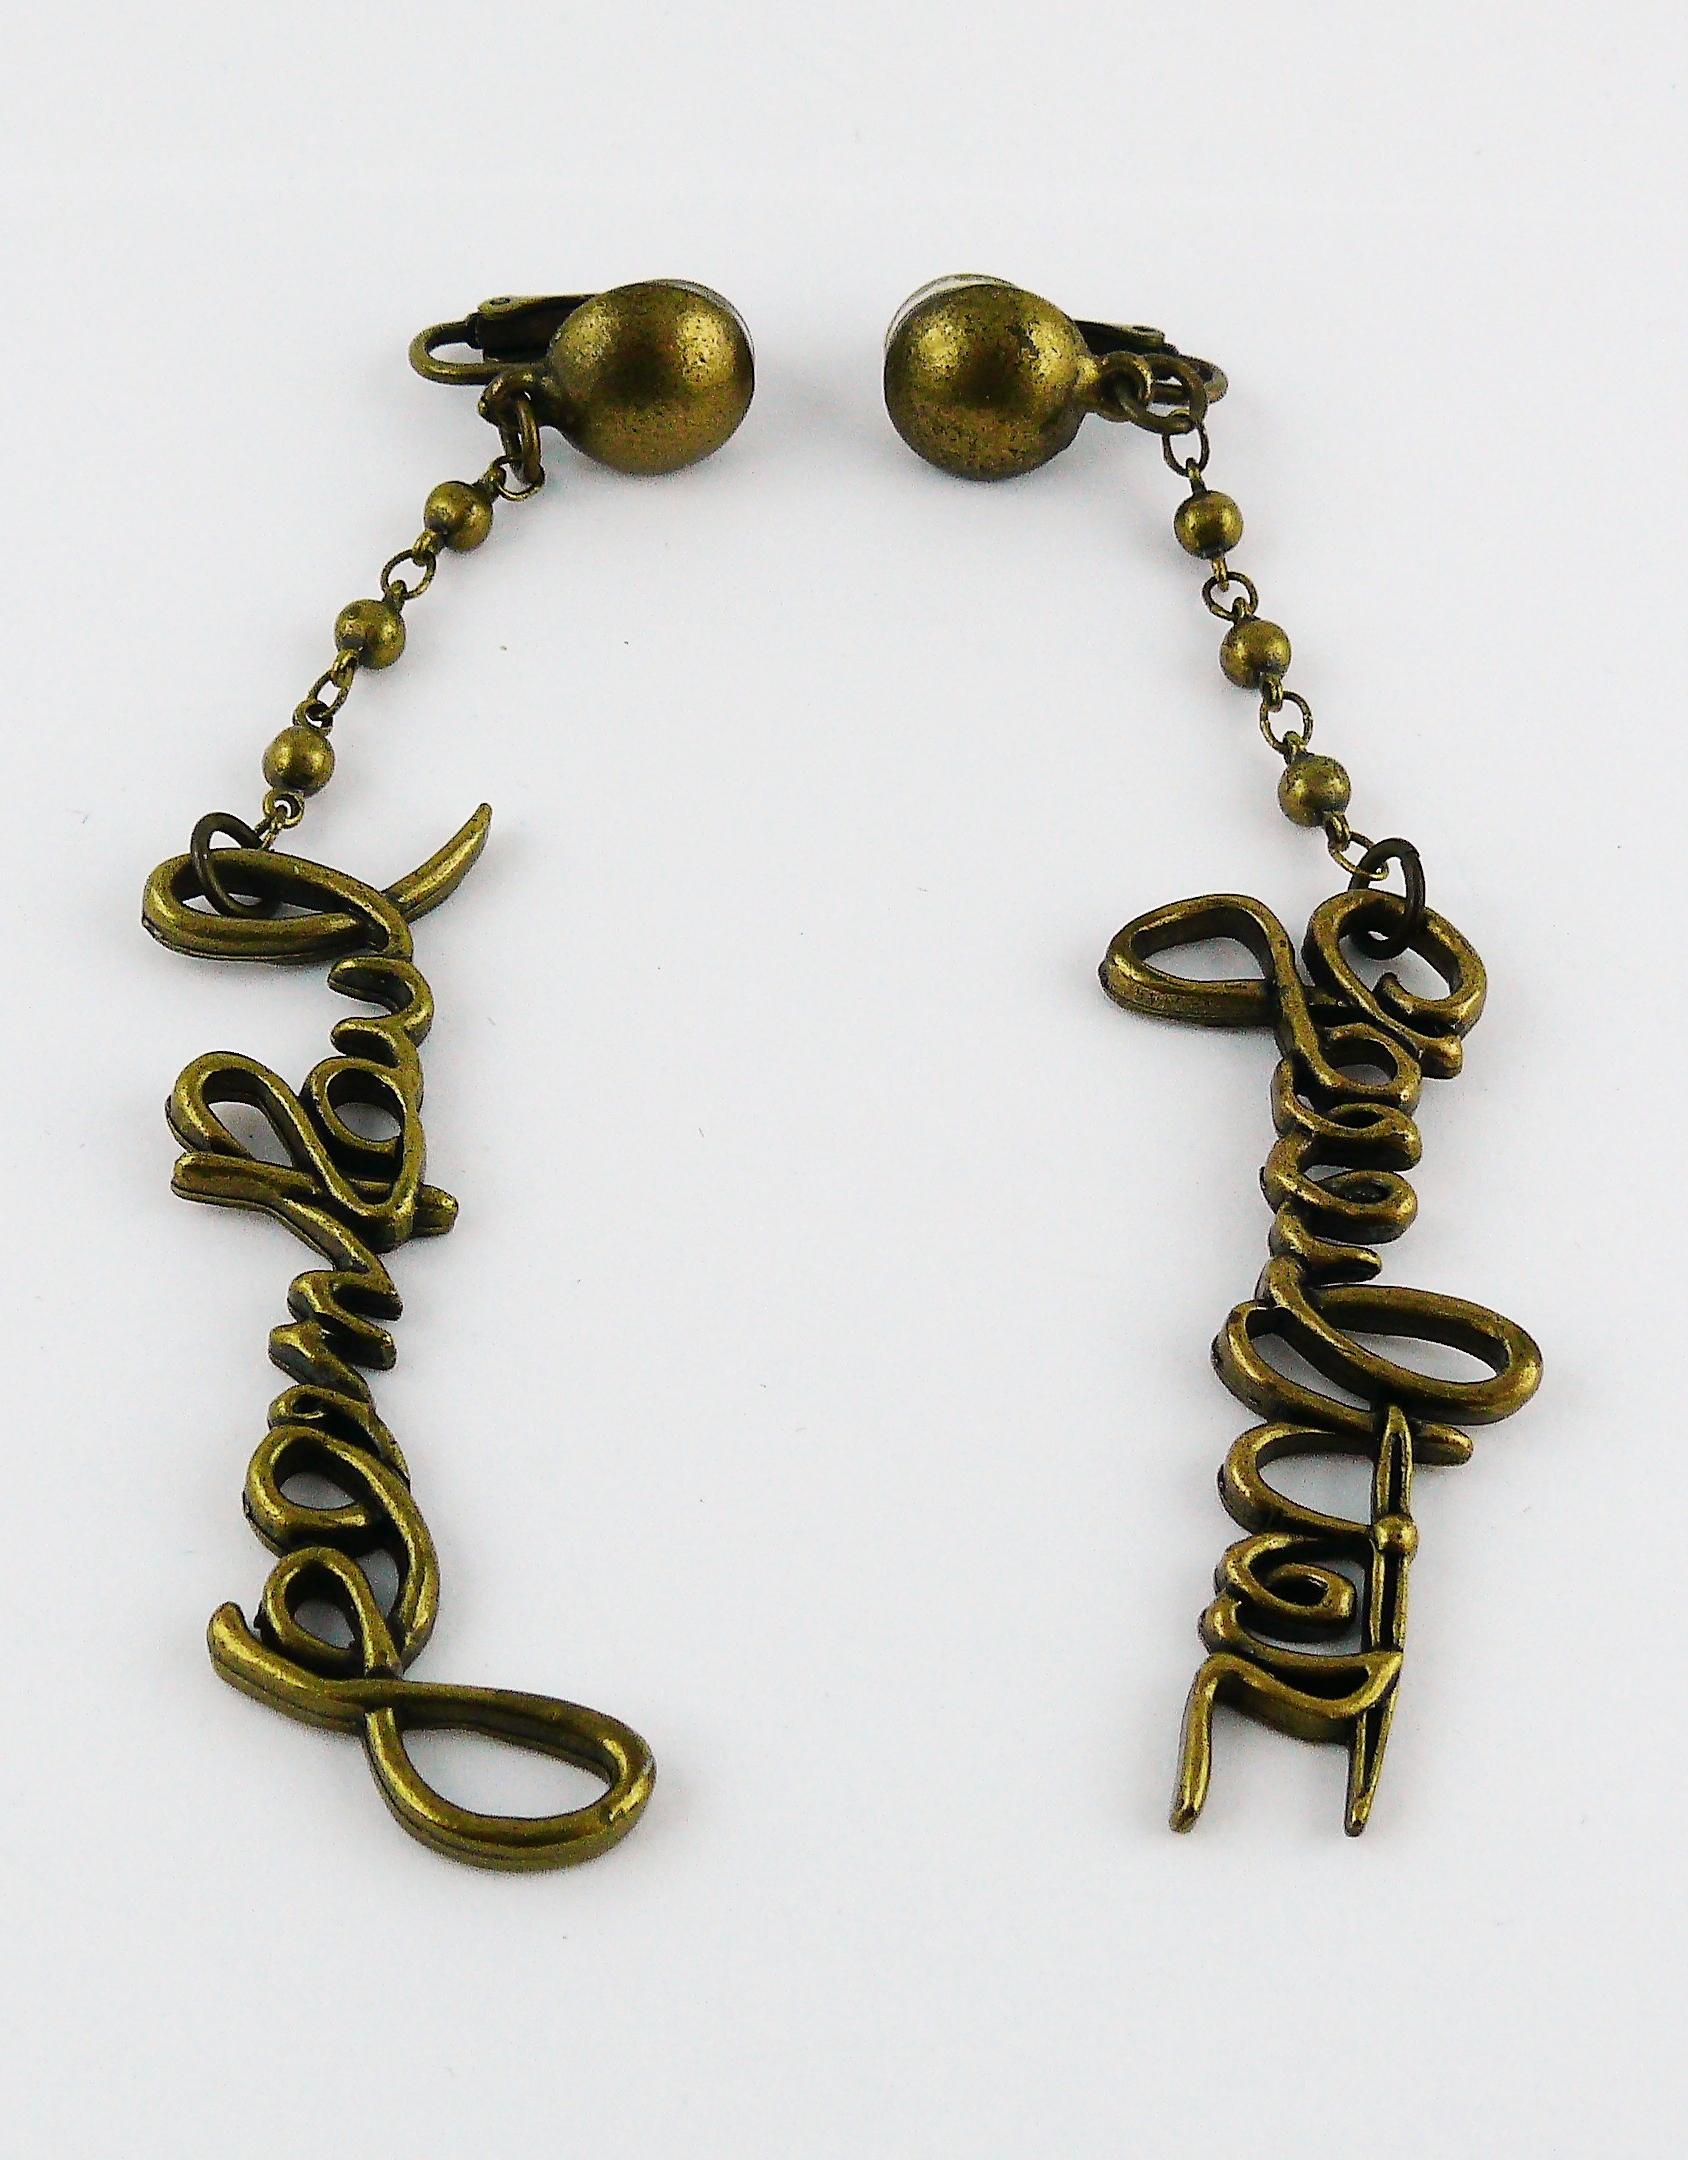 JEAN PAUL GAULTIER vintage antiqued bronze toned dangling earrings (clip-on) featuring cursive signatures JEAN PAUL and GAULTIER.

Marked GAULTIER.

Indicative measurements : length approx. 10 cm (3.94 inches) / max. width approx. 1.4 cm (0.55